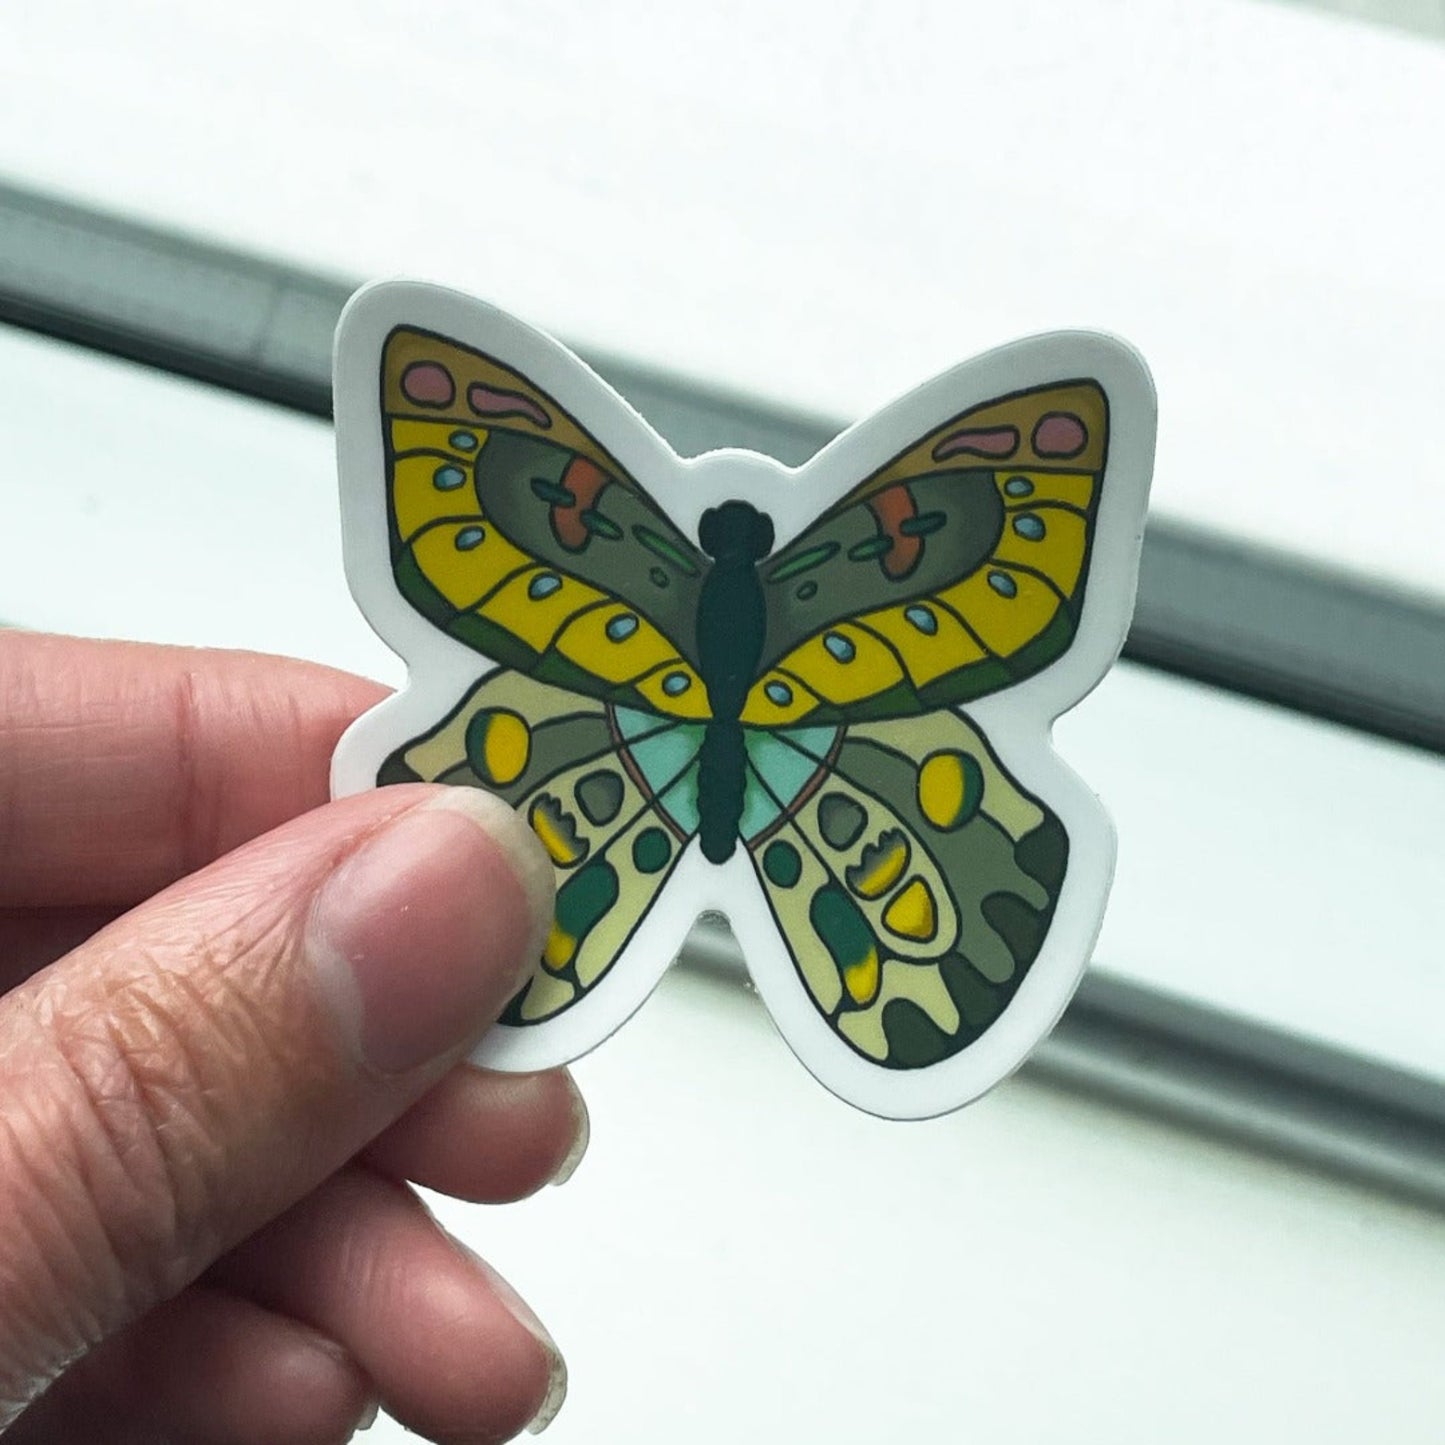 A butterfly sticker with blue, yellow, and green highlights is seen held in a hand on a white background